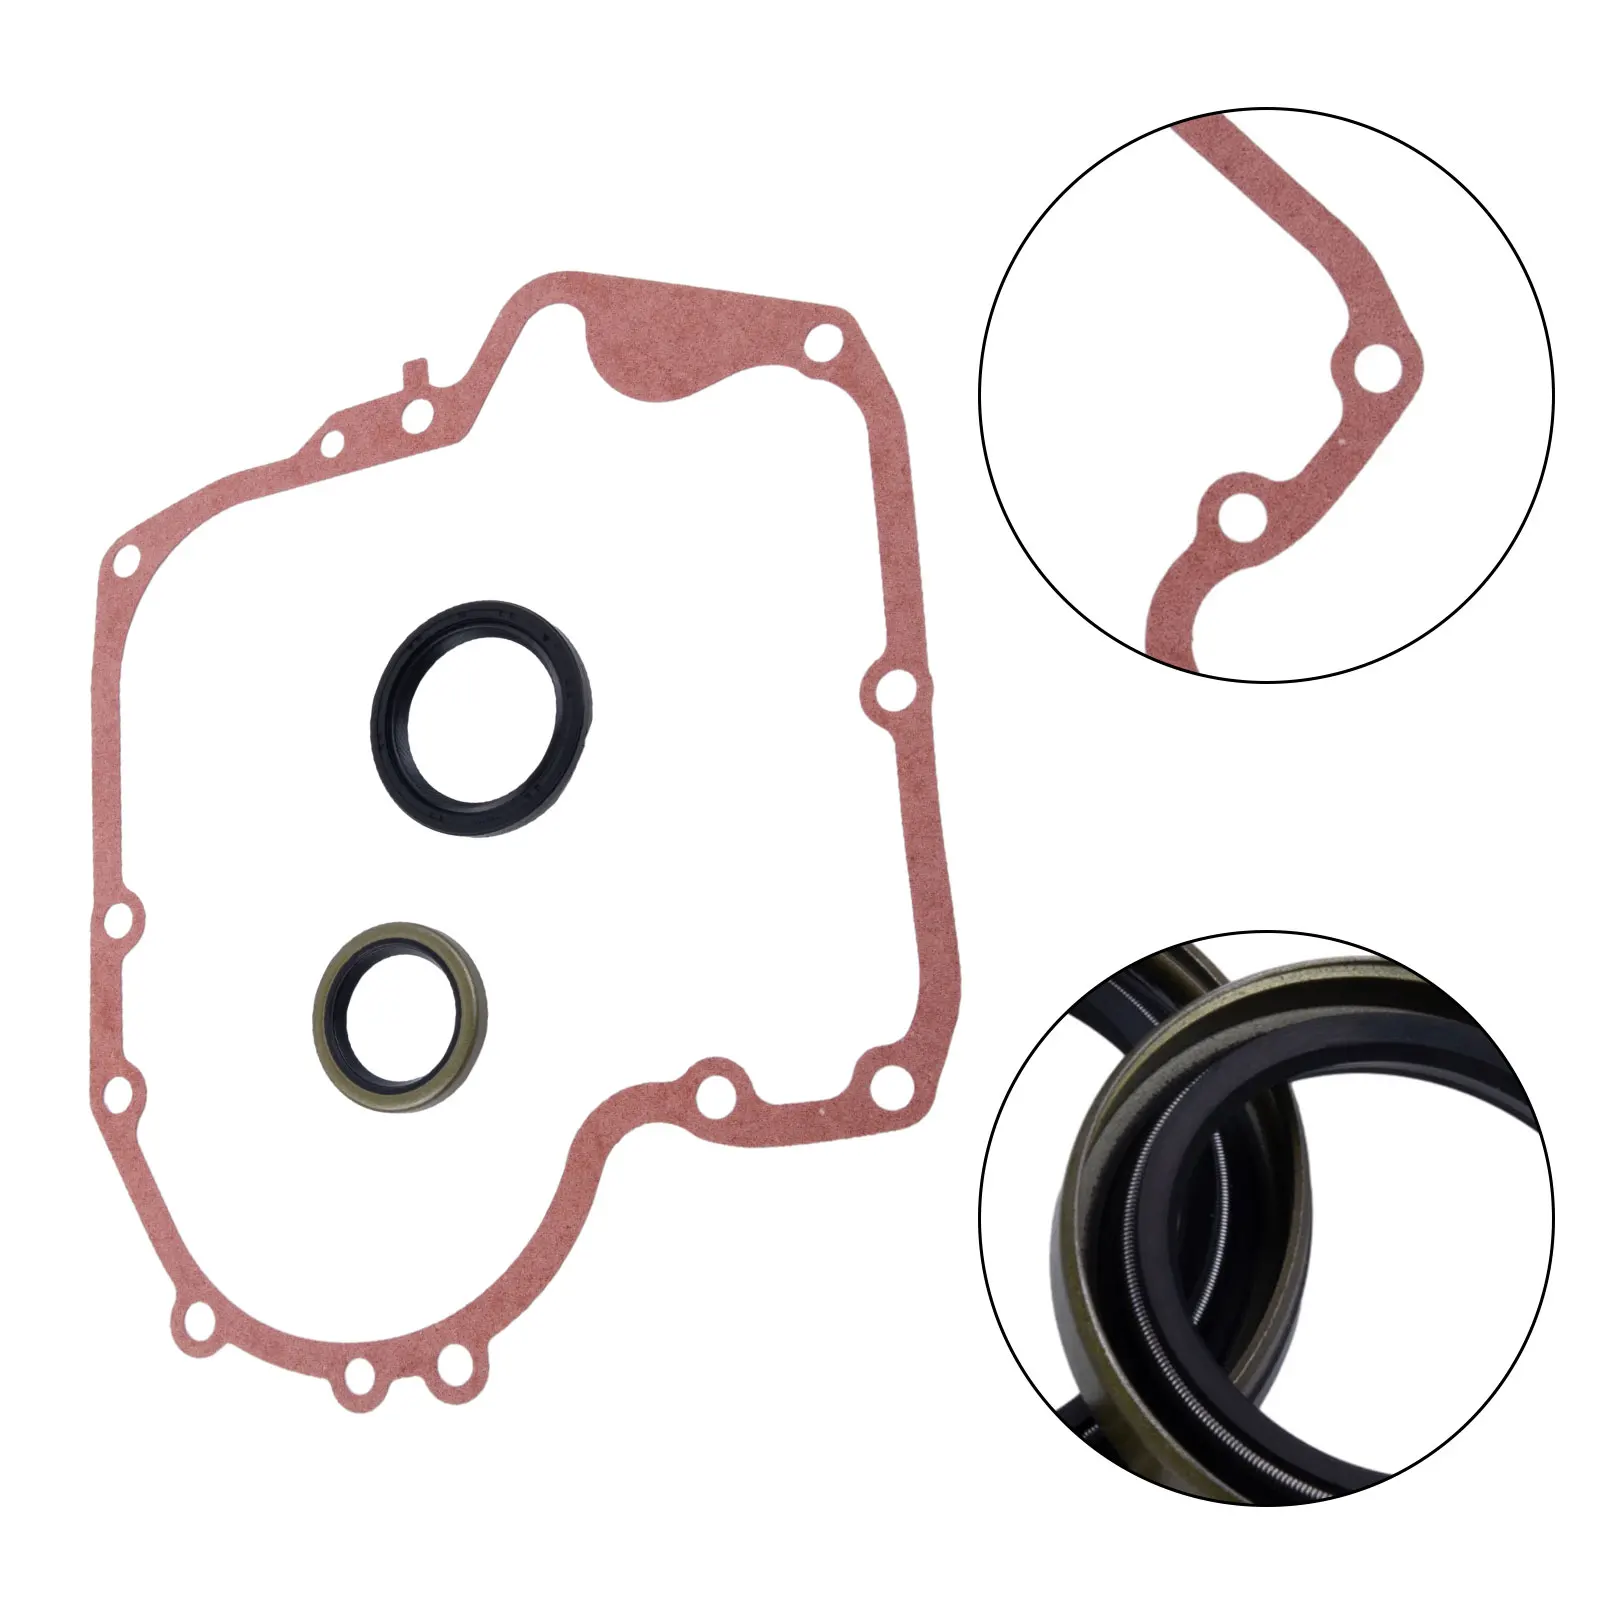 For Lawn Mower Crankcase Gasket 697110 & 795387 Combo Set Metal Oil Seal Parts Replacement Affordable Brand New